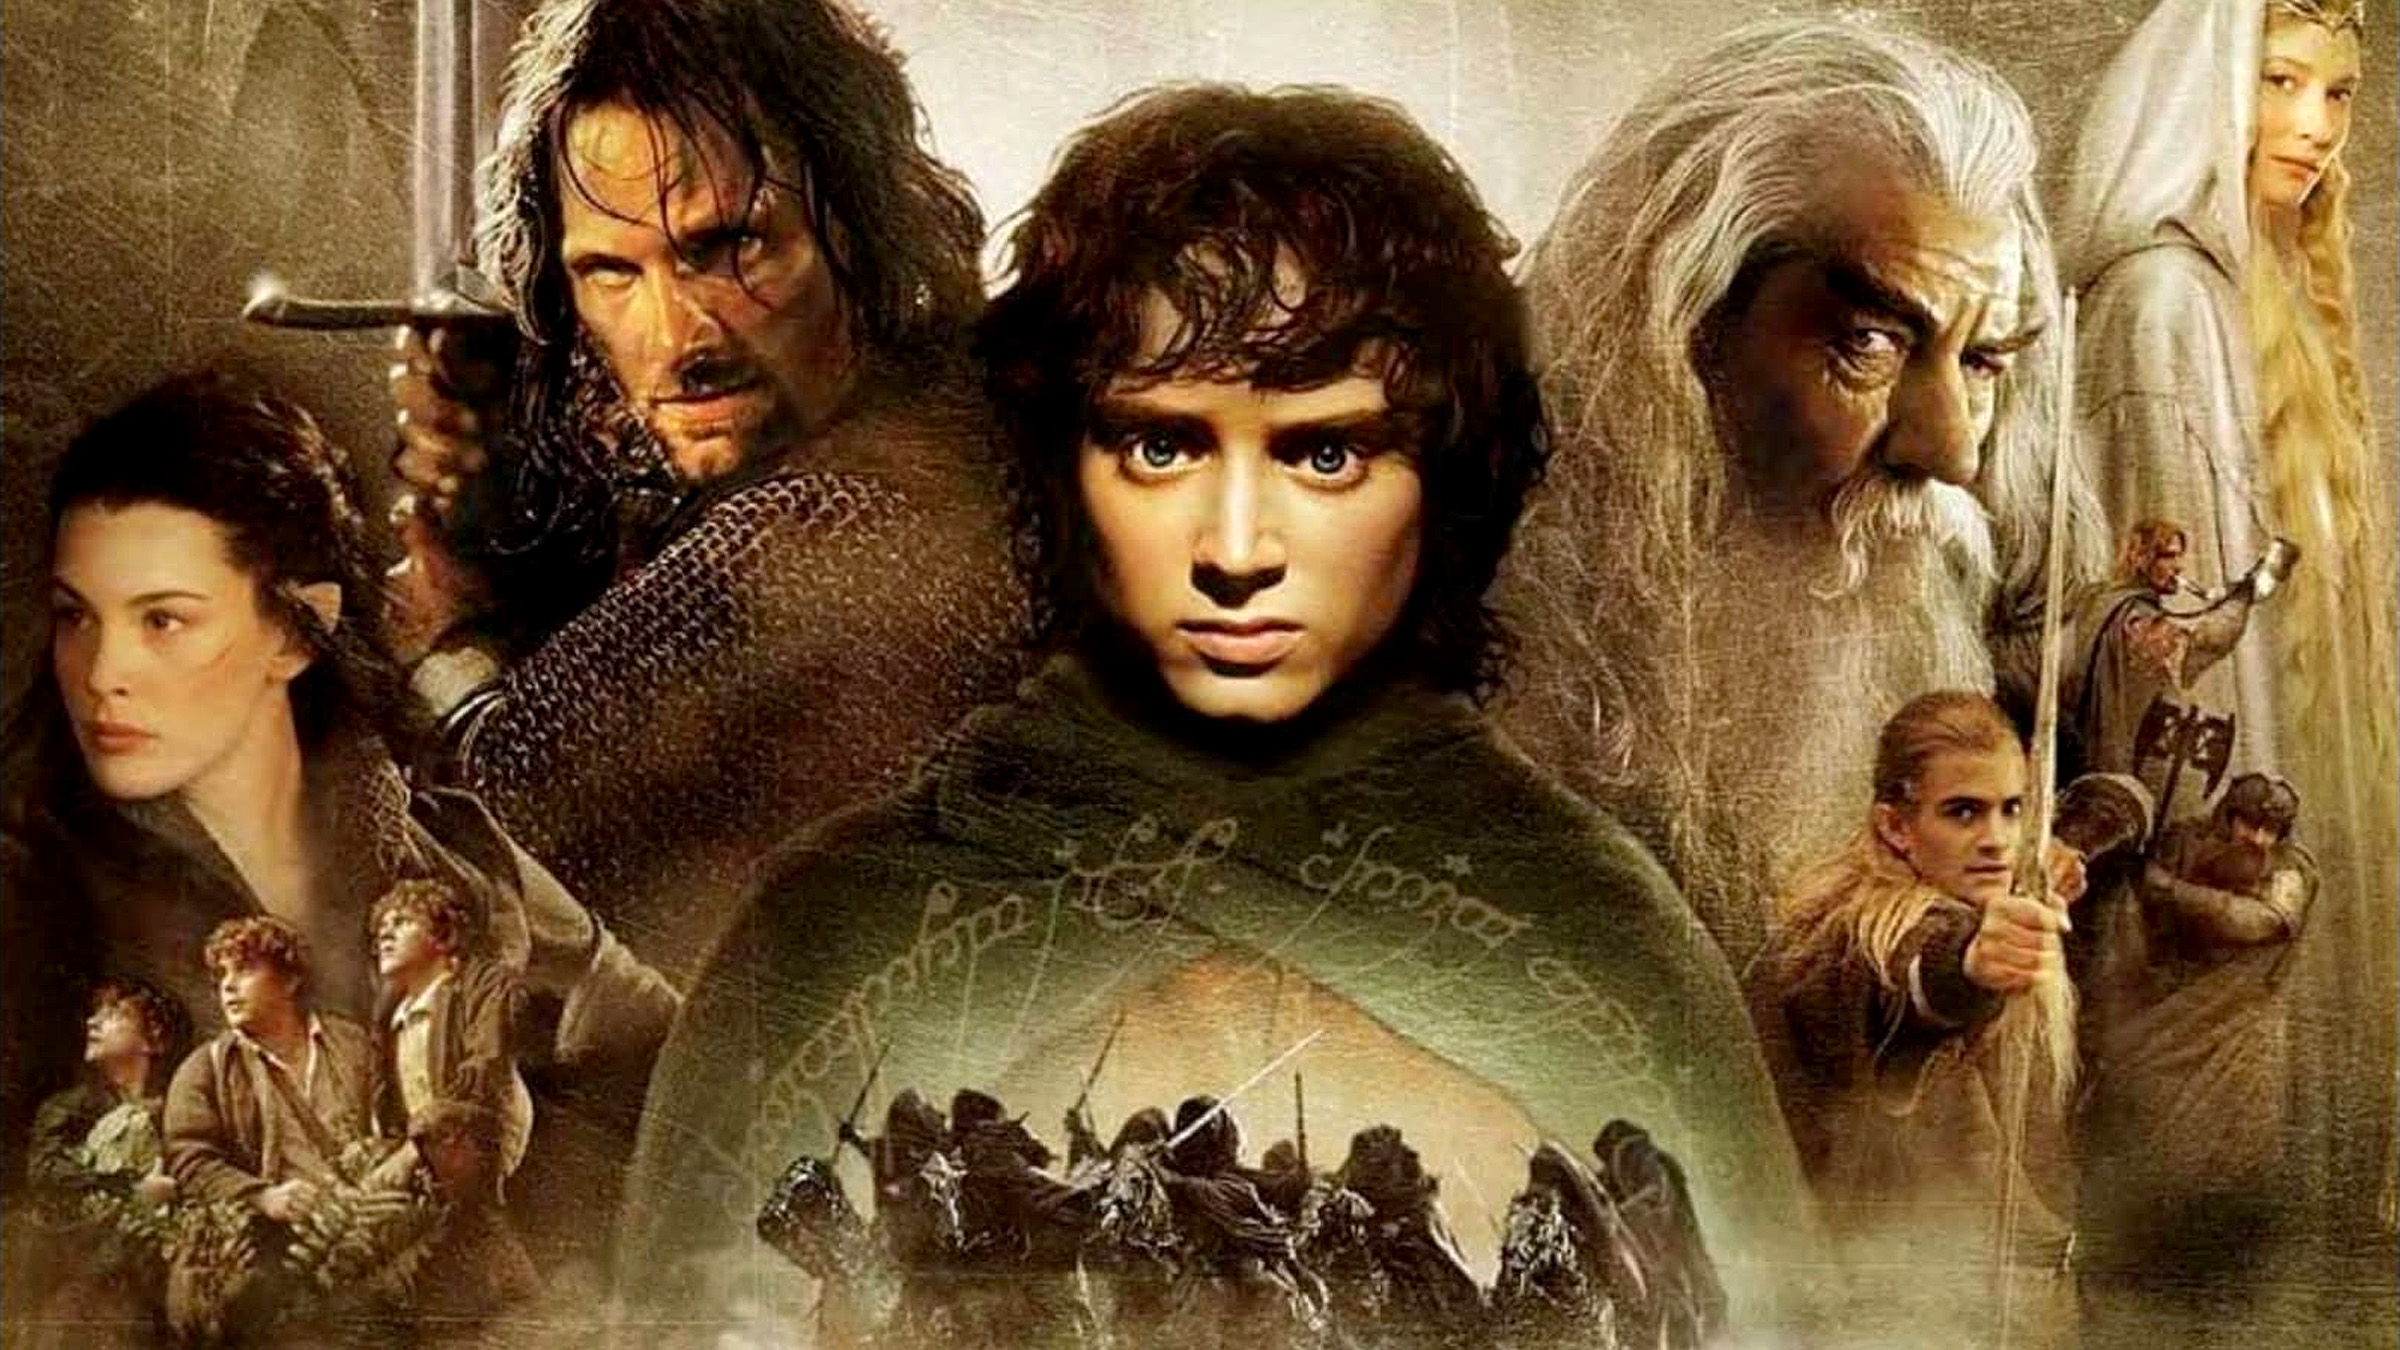 The Lord of the Rings Turns 20: Looking Back on an Epic Cinematic Legacy